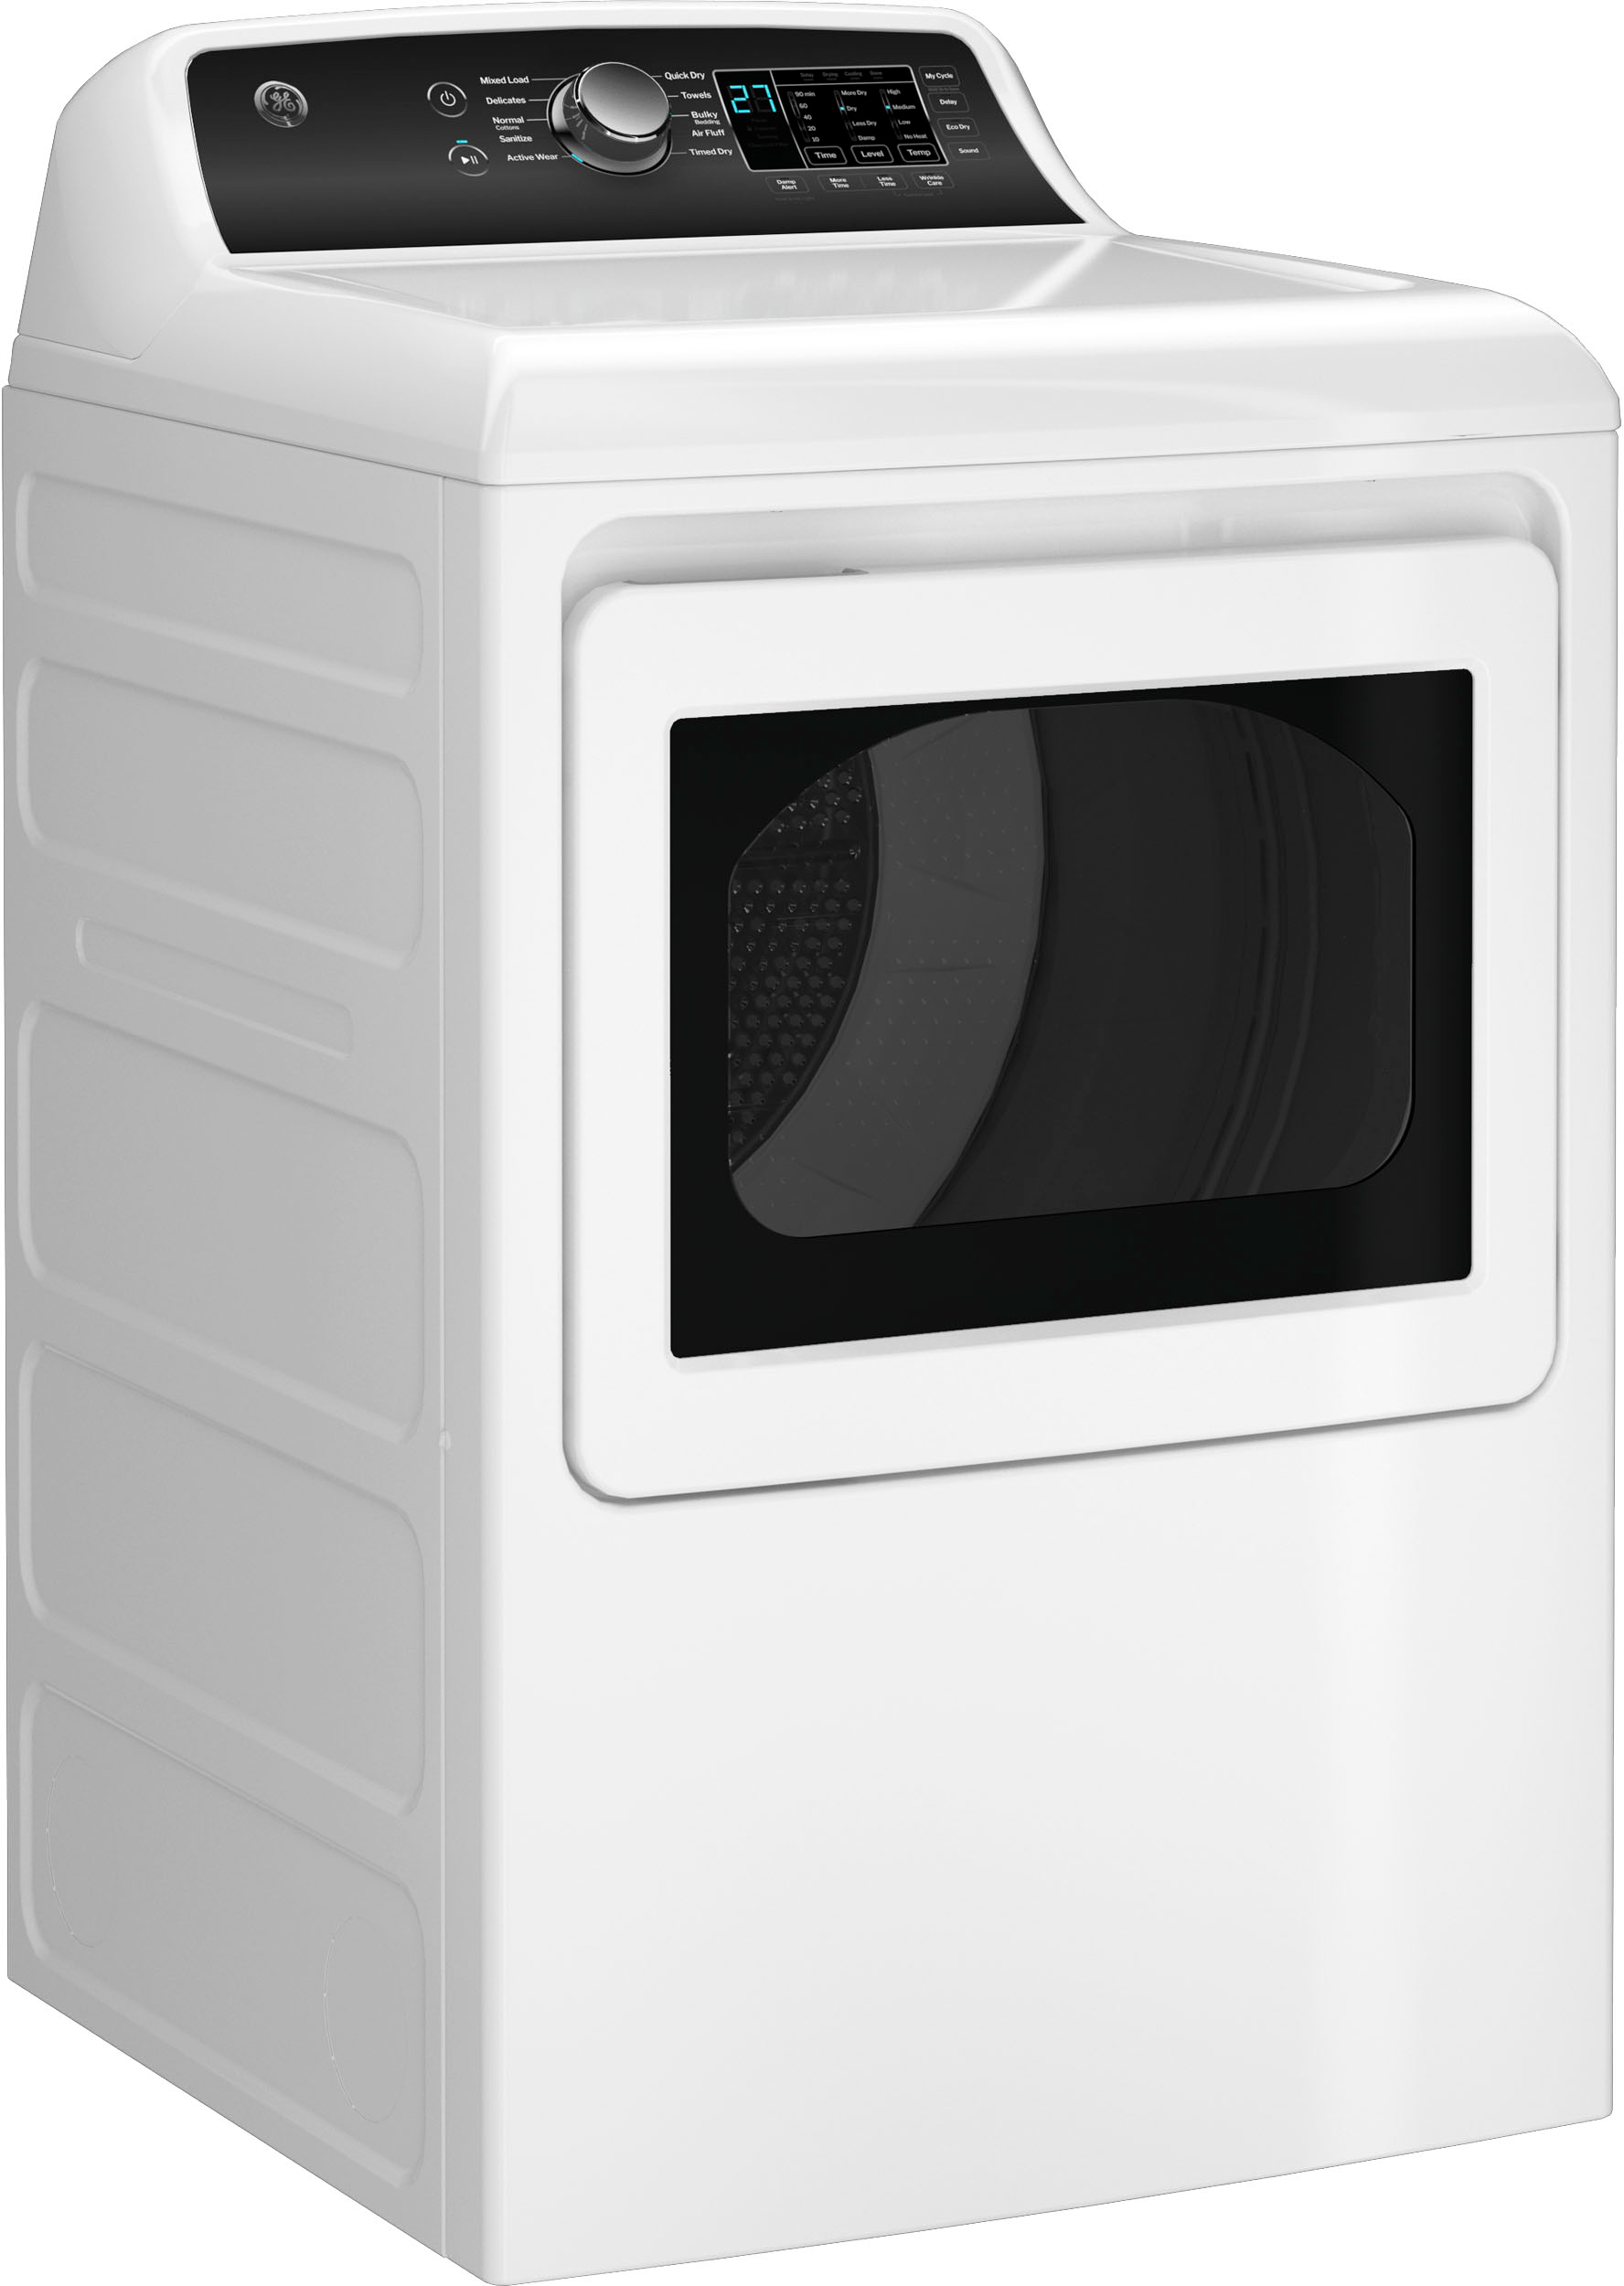 Angle View: GE - 3.9 Cu. Ft. Top Load Washer and 5.9 Cu.Ft Gas Dryer Laundry Center - White